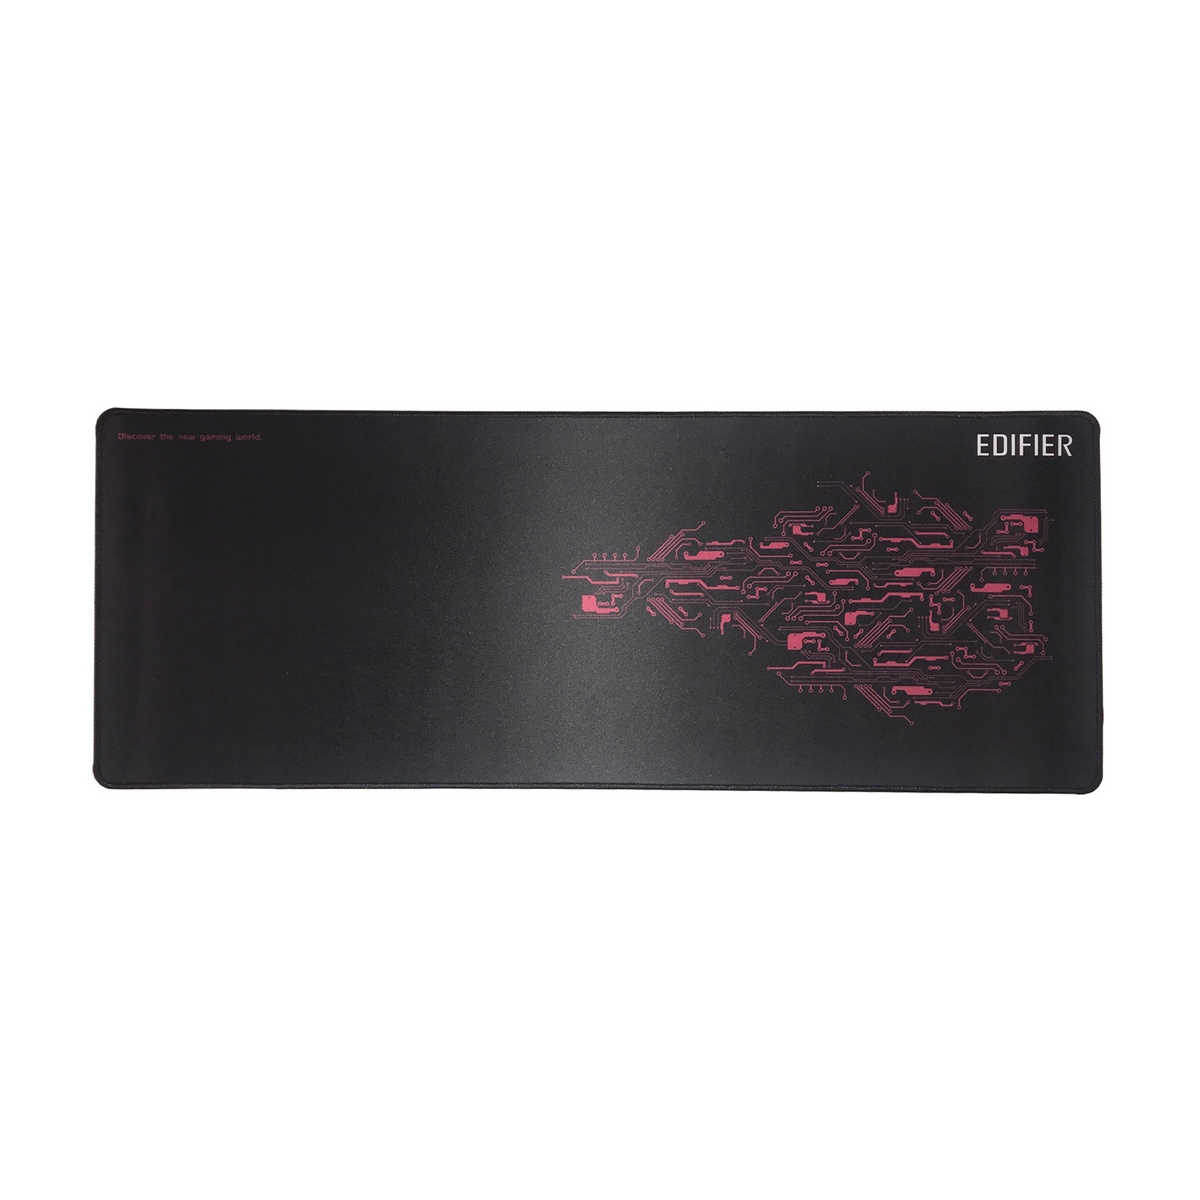 Edifier Gaming Surface - Large - EDFR-MP-L